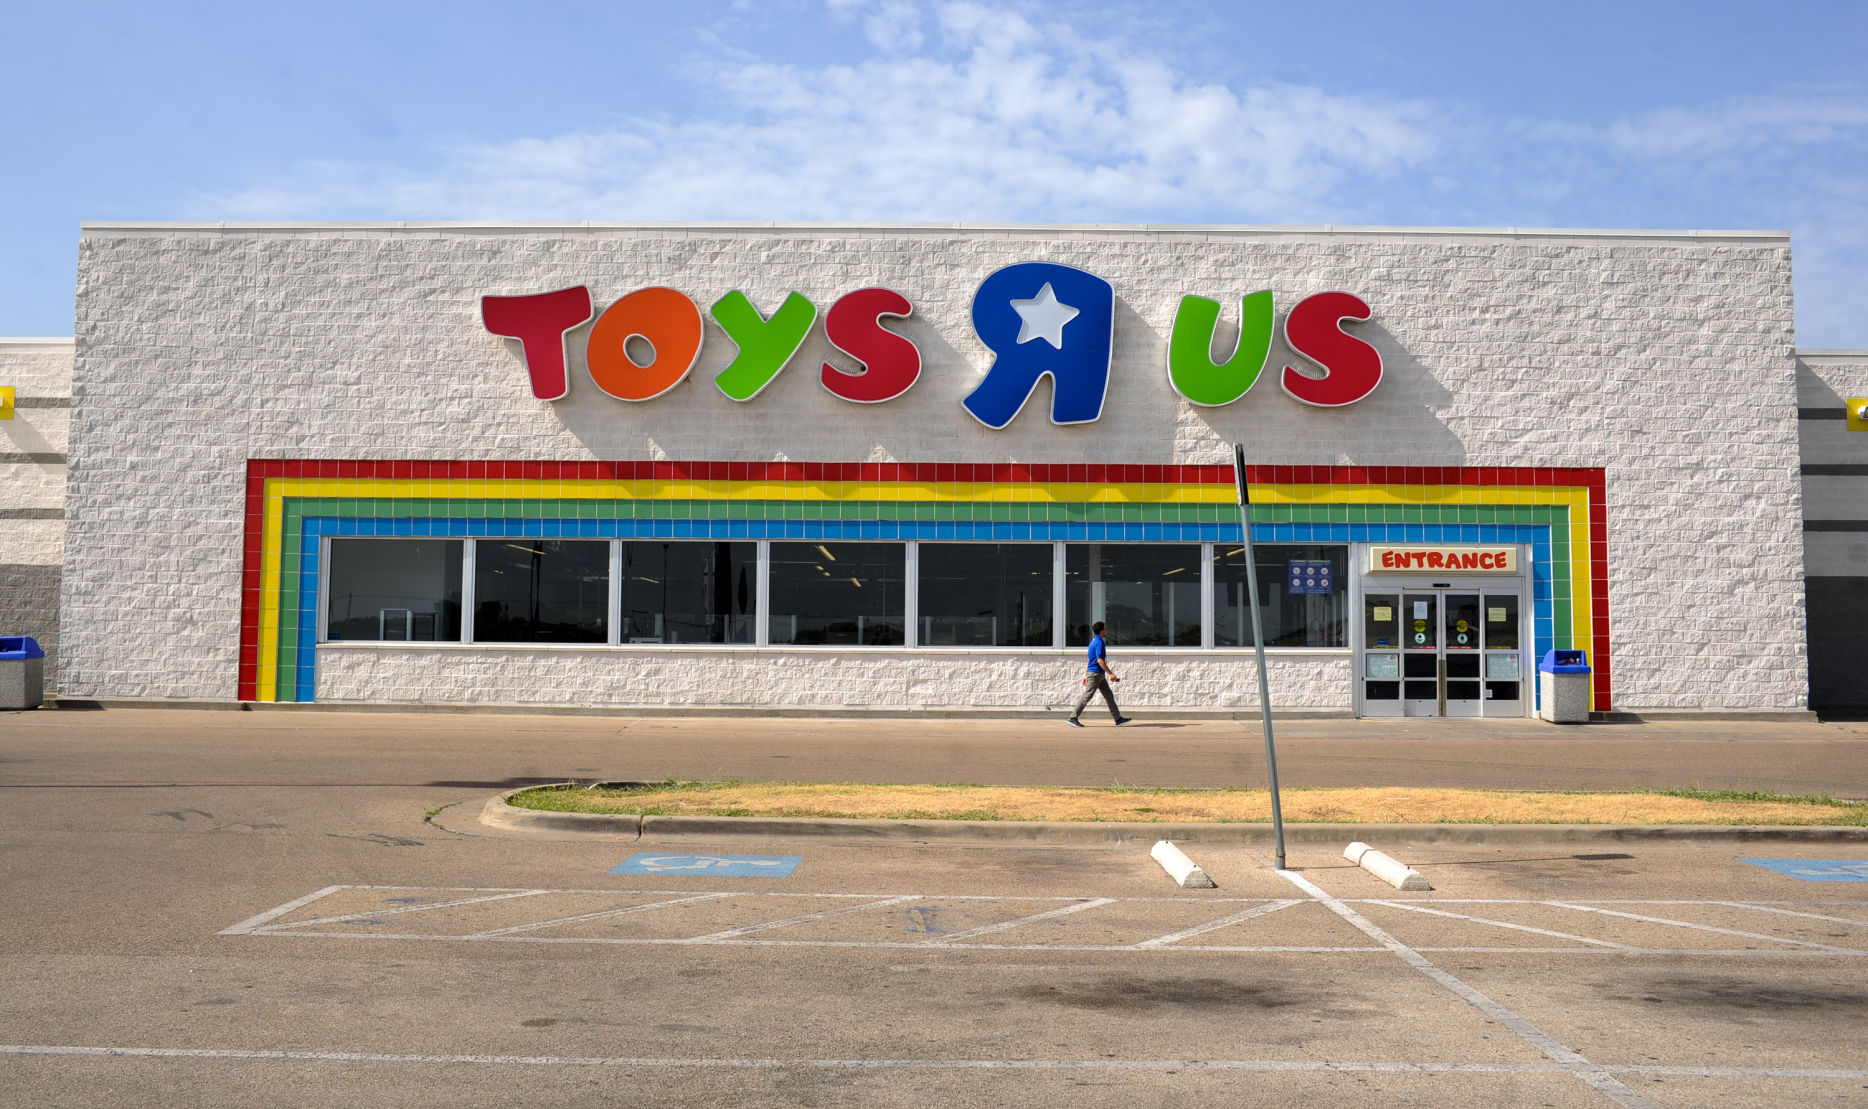 toys r us not closing